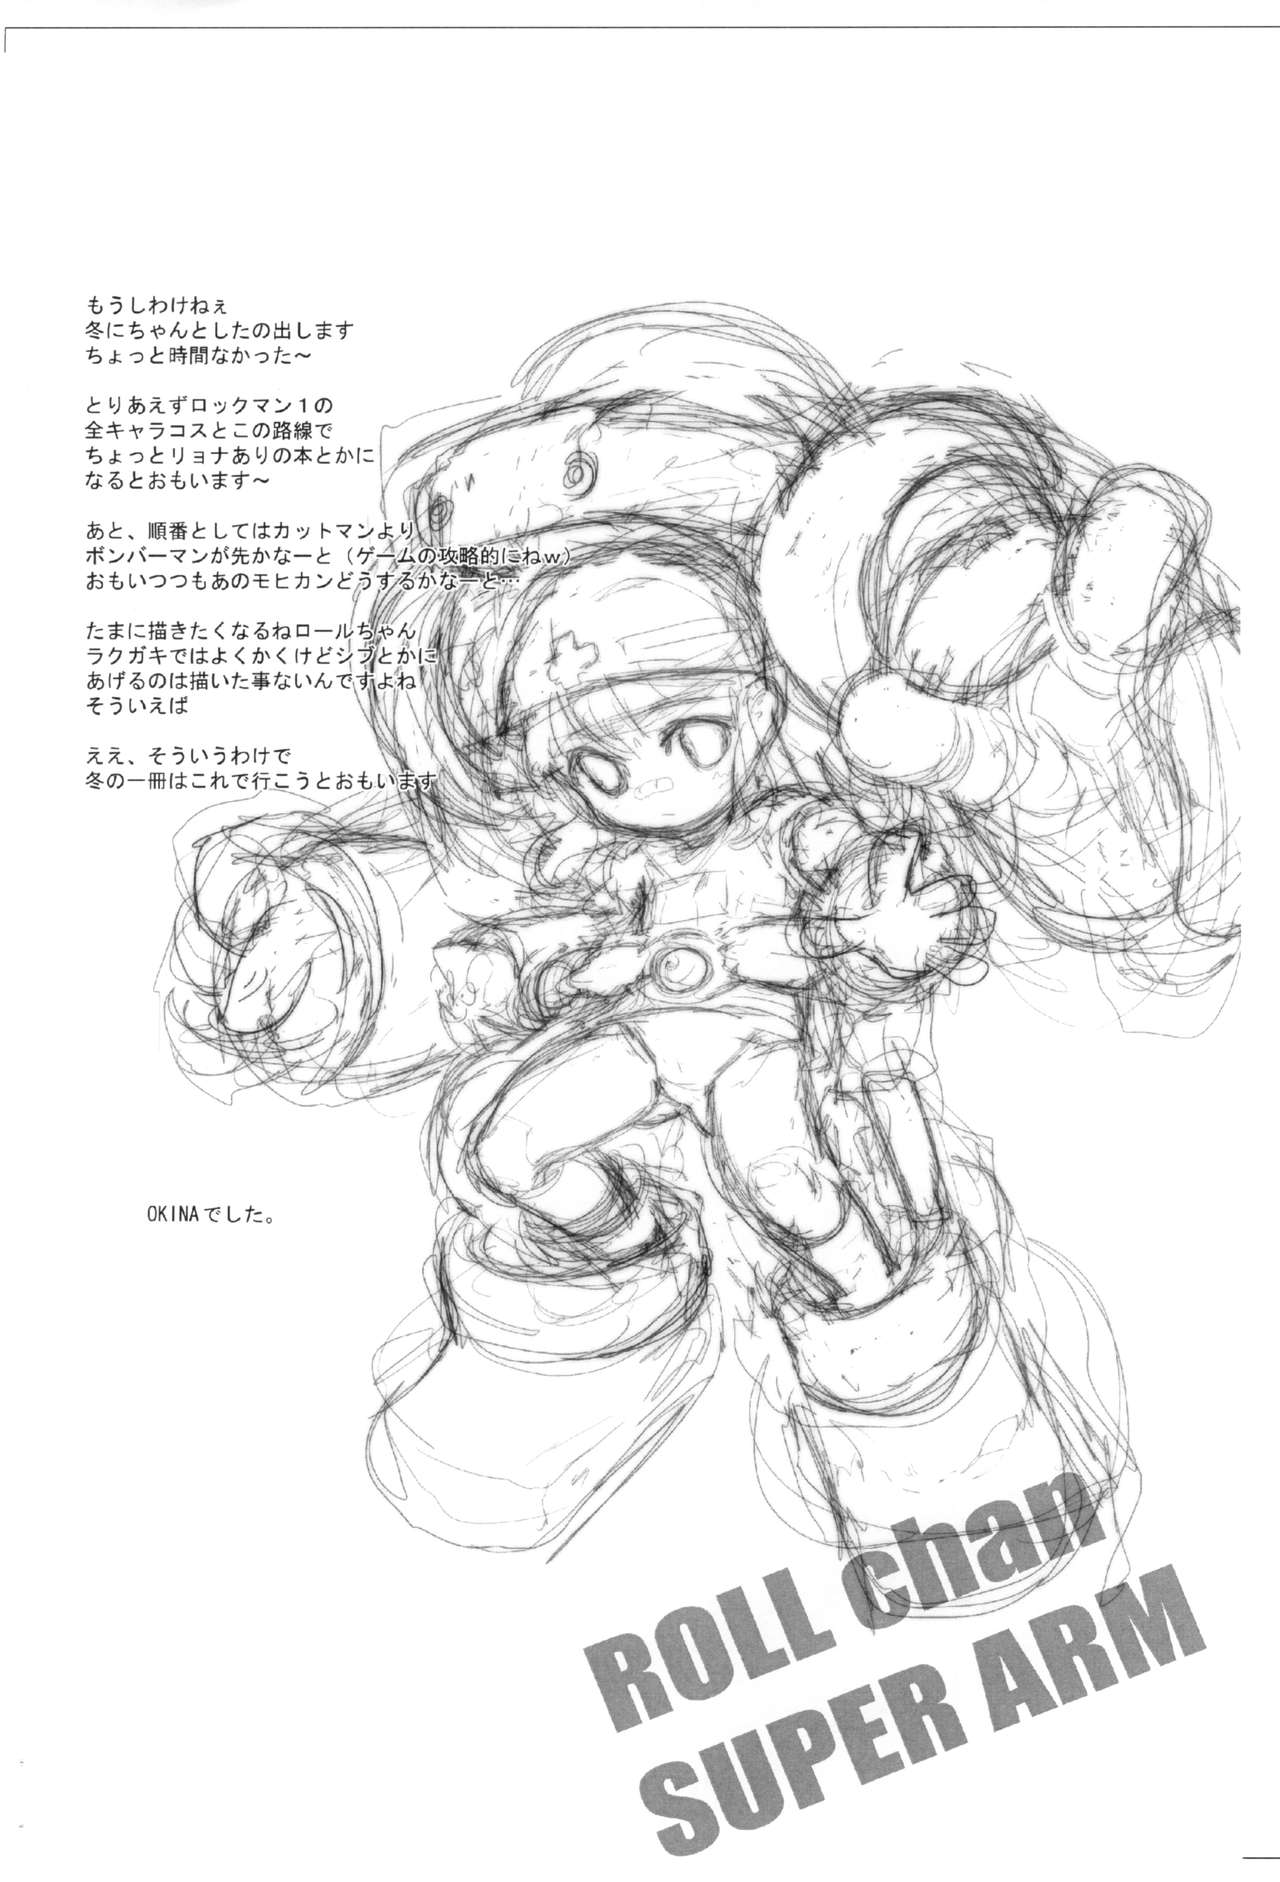 [OKINA FLYING FACTORY (OKINA)] ROLL chan COPYBON (ロックマン)